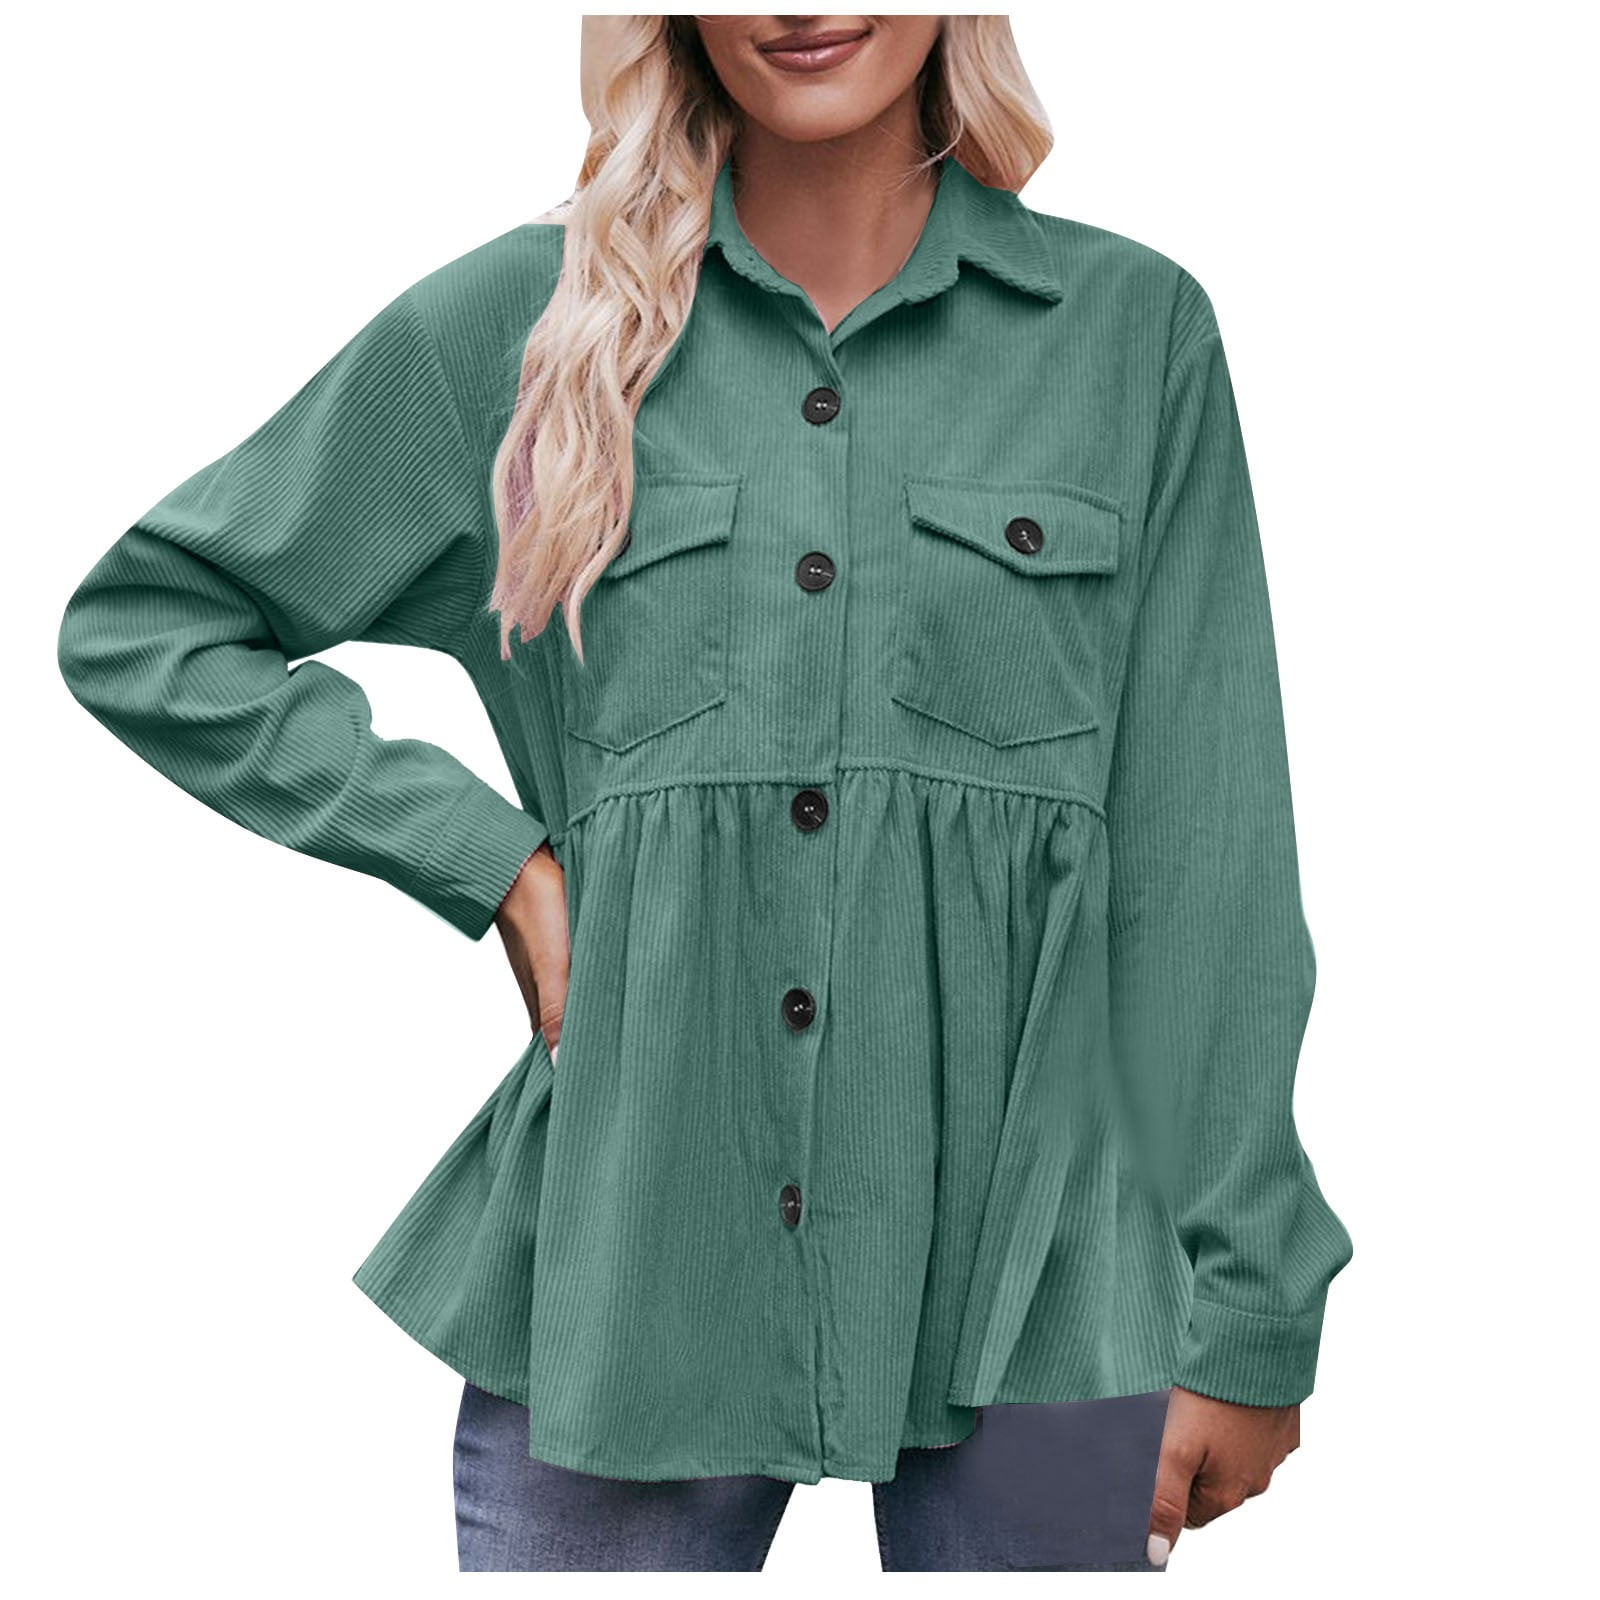 Corduroy Jackets for Women Fall Casual Button up Shirt Jacket Coat with  Pockets Long Sleeve Babydoll Cute Tops (Medium, Green)